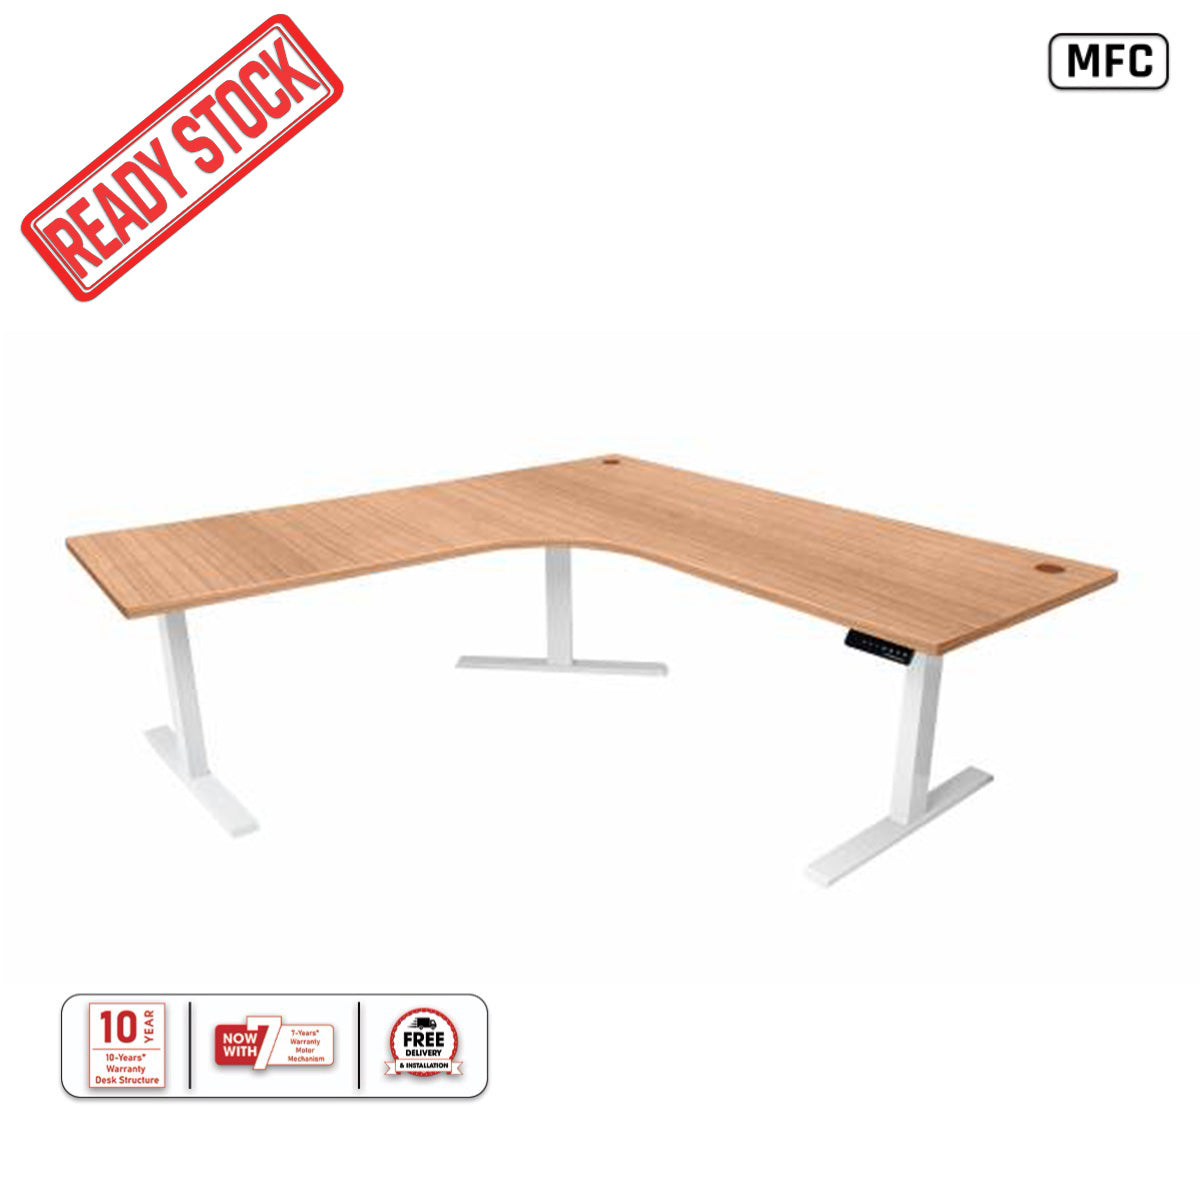 (READY STOCKS) L-Shaped Height Adjustable Electric Desk EW-0336F1V2, MFC Tabletop